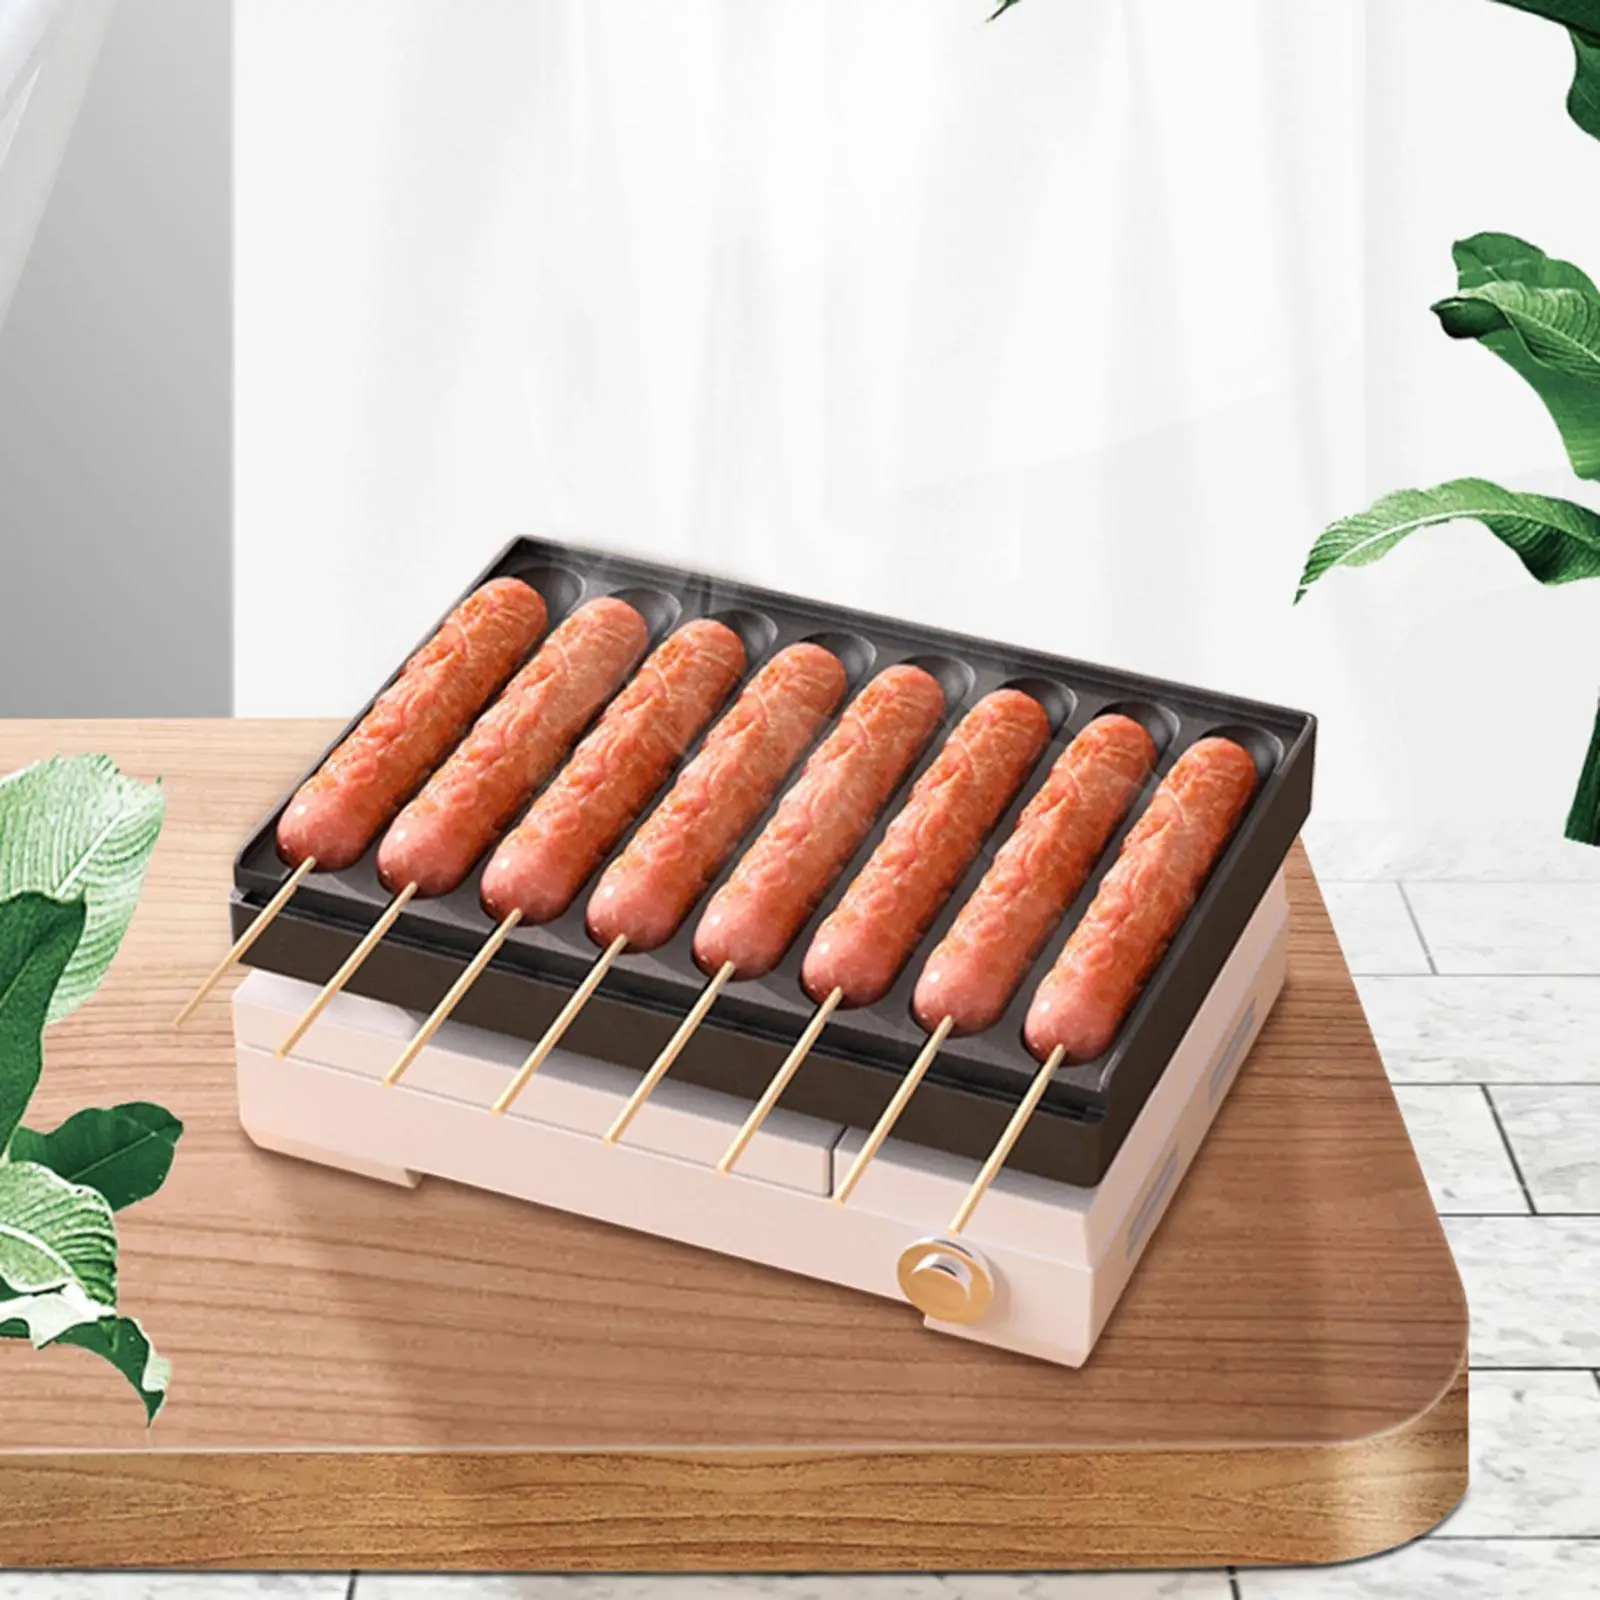 8 Cavity Sausage Pan Aluminum Alloy Nonstick Square Grill Pan Waffle Corn Dog Maker Hot Dog Maker for Breakfast Kitchen